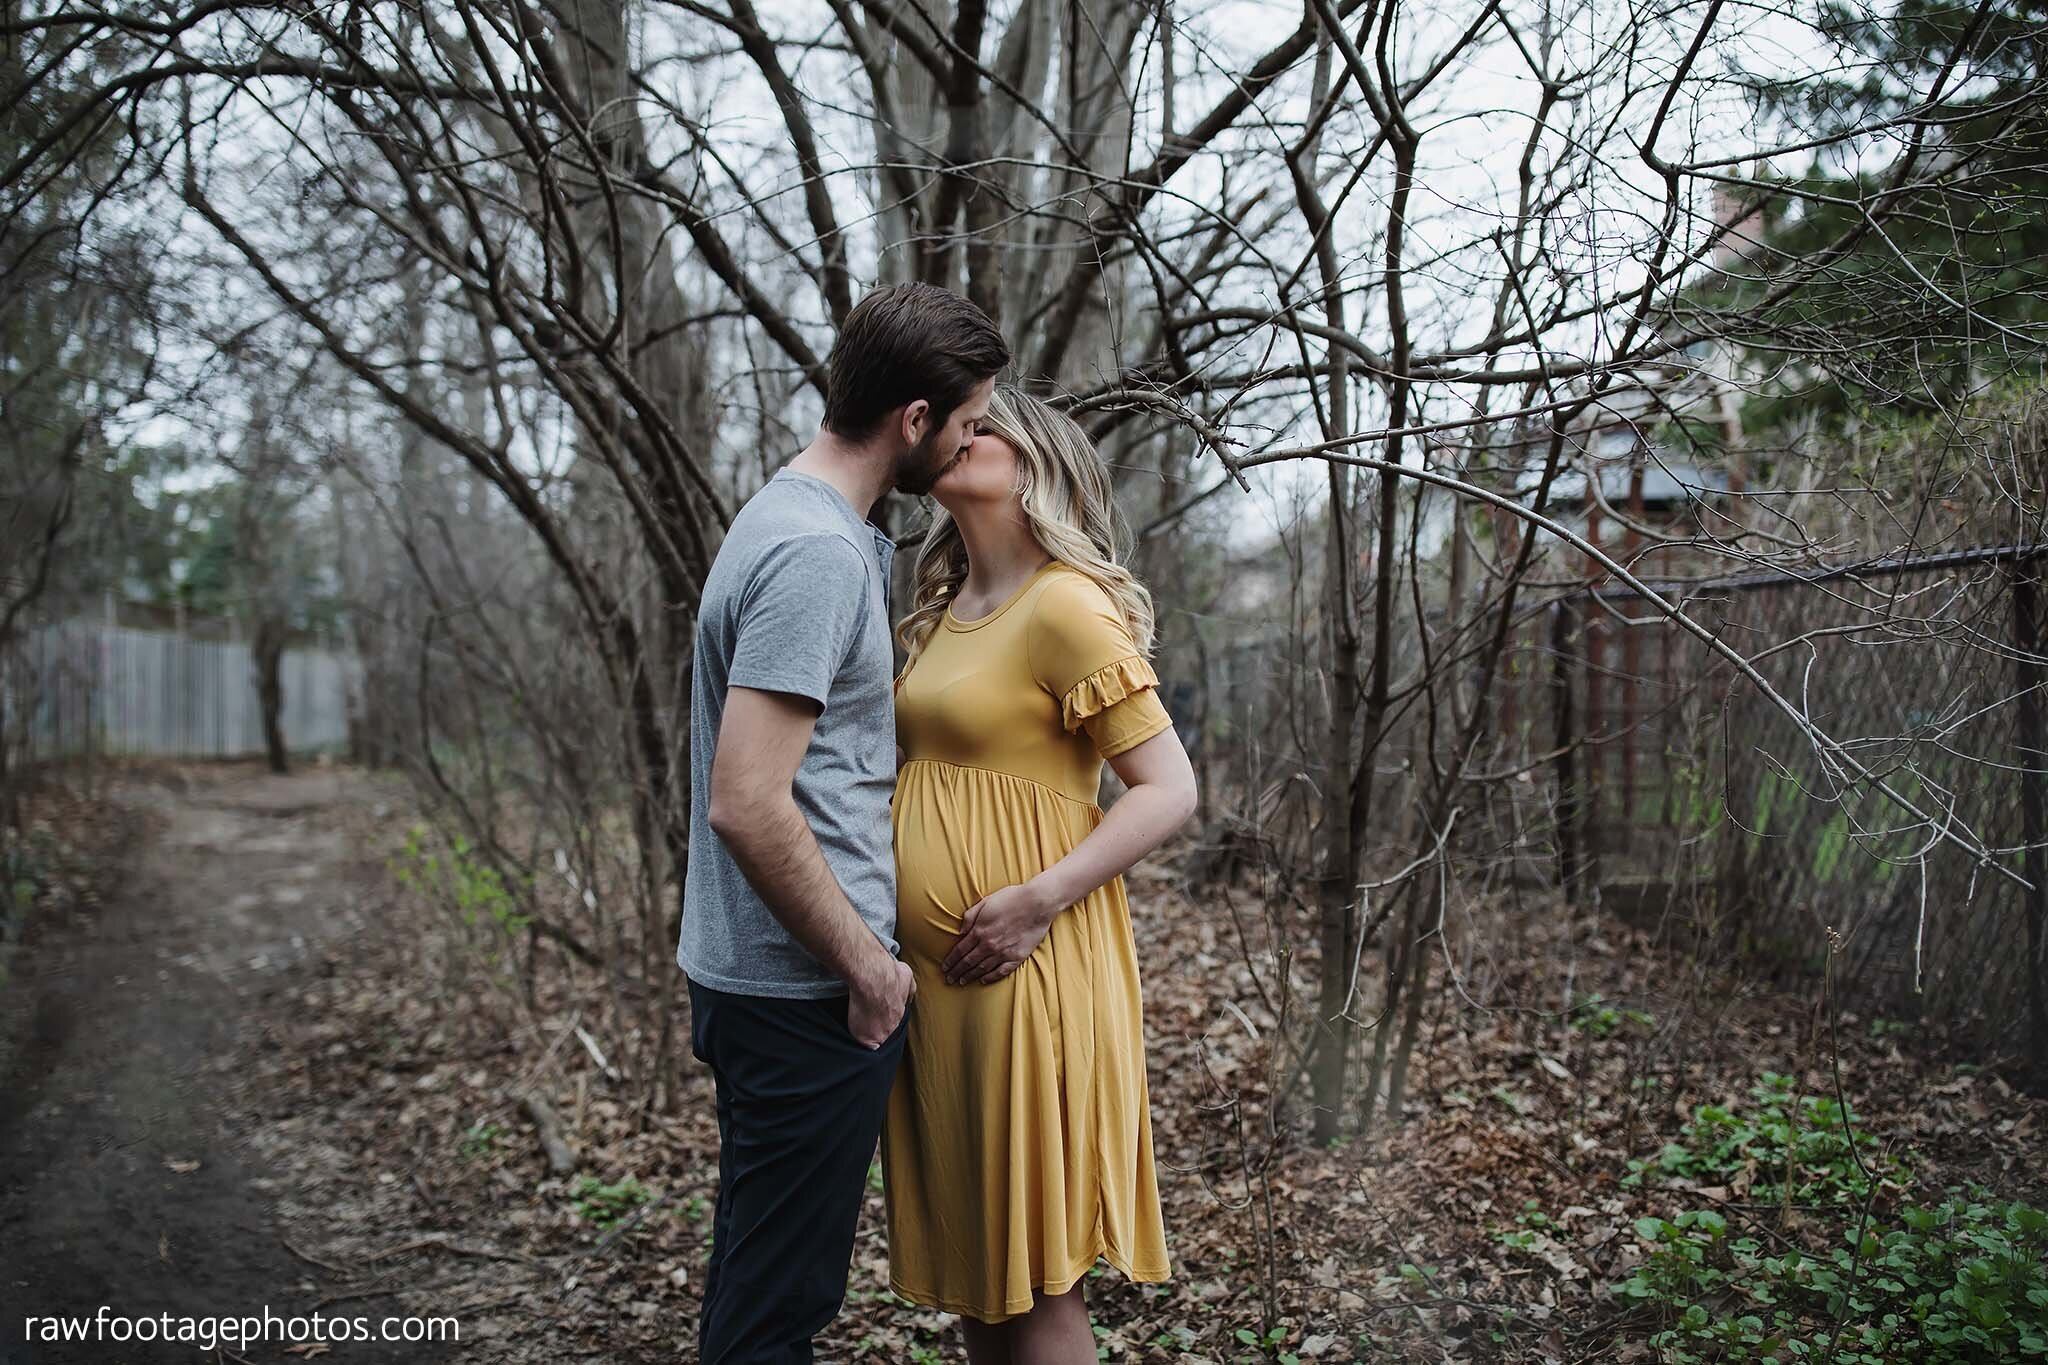 london_ontario_maternity_photographer-raw_footage_photography-in_home_lifestyle_maternity-forest_maternity_session-yellow_maternity_dress_036.jpg